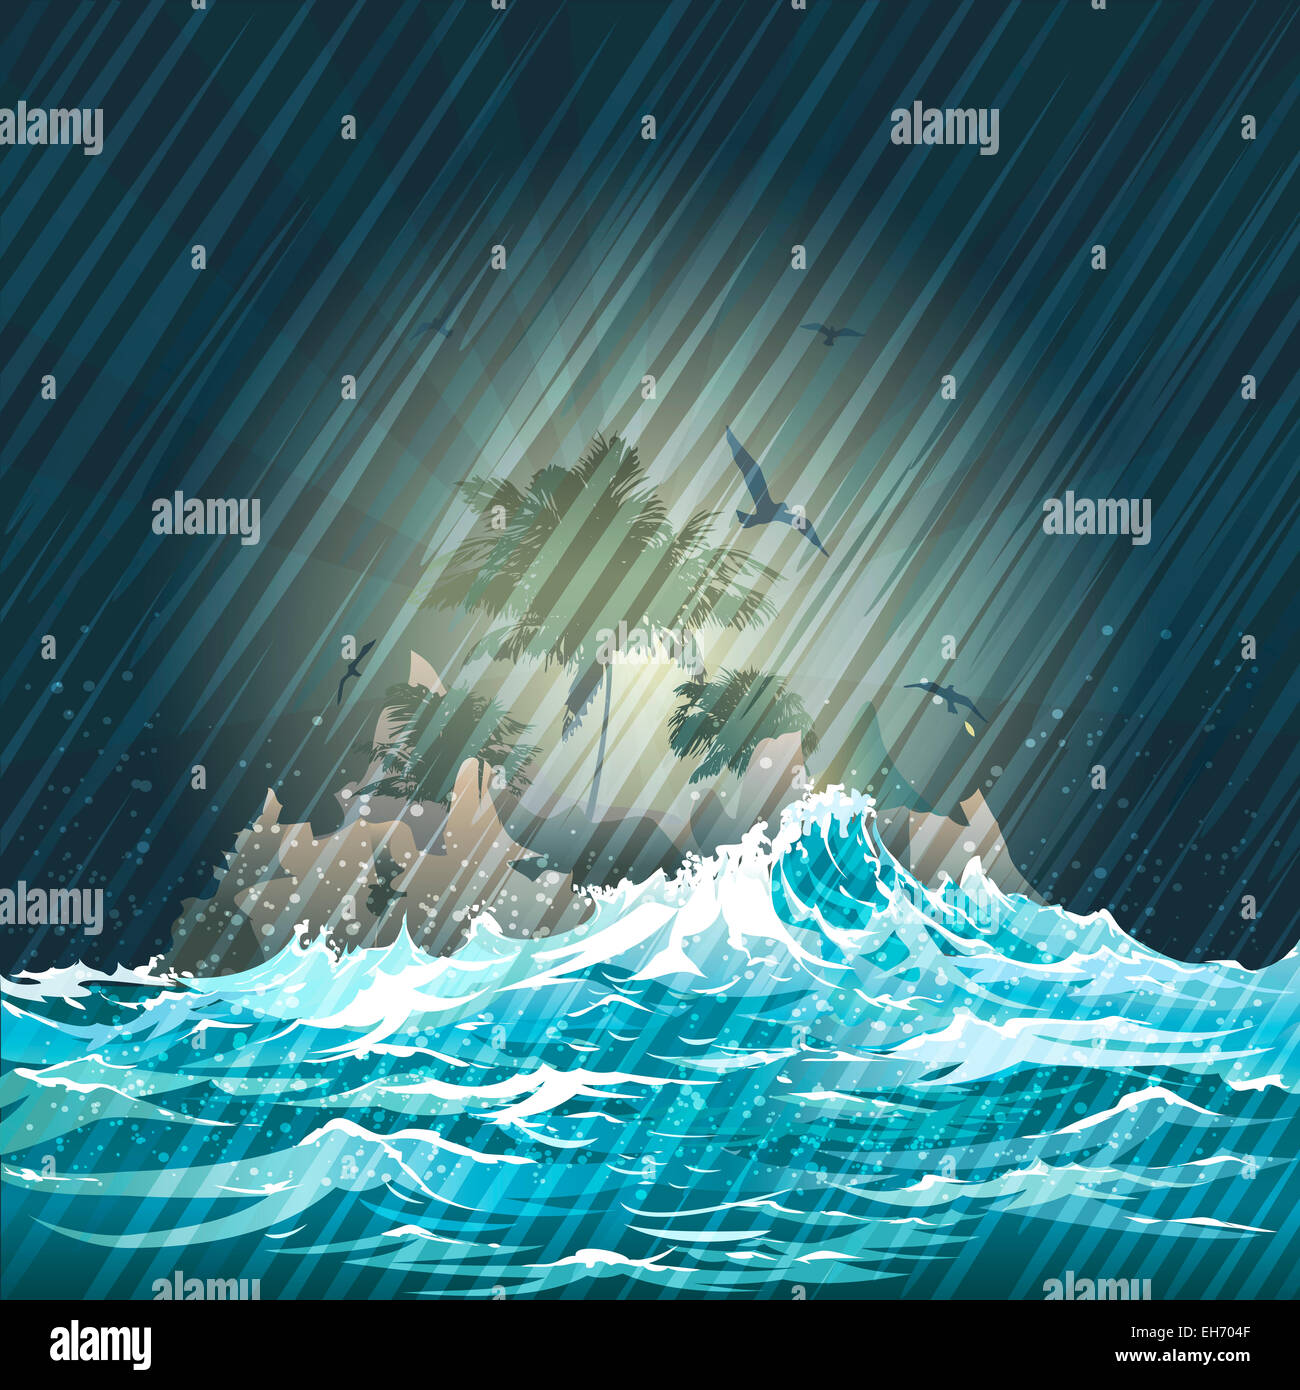 Illustration with lost island in the storming ocean against  night rainy sky Stock Photo